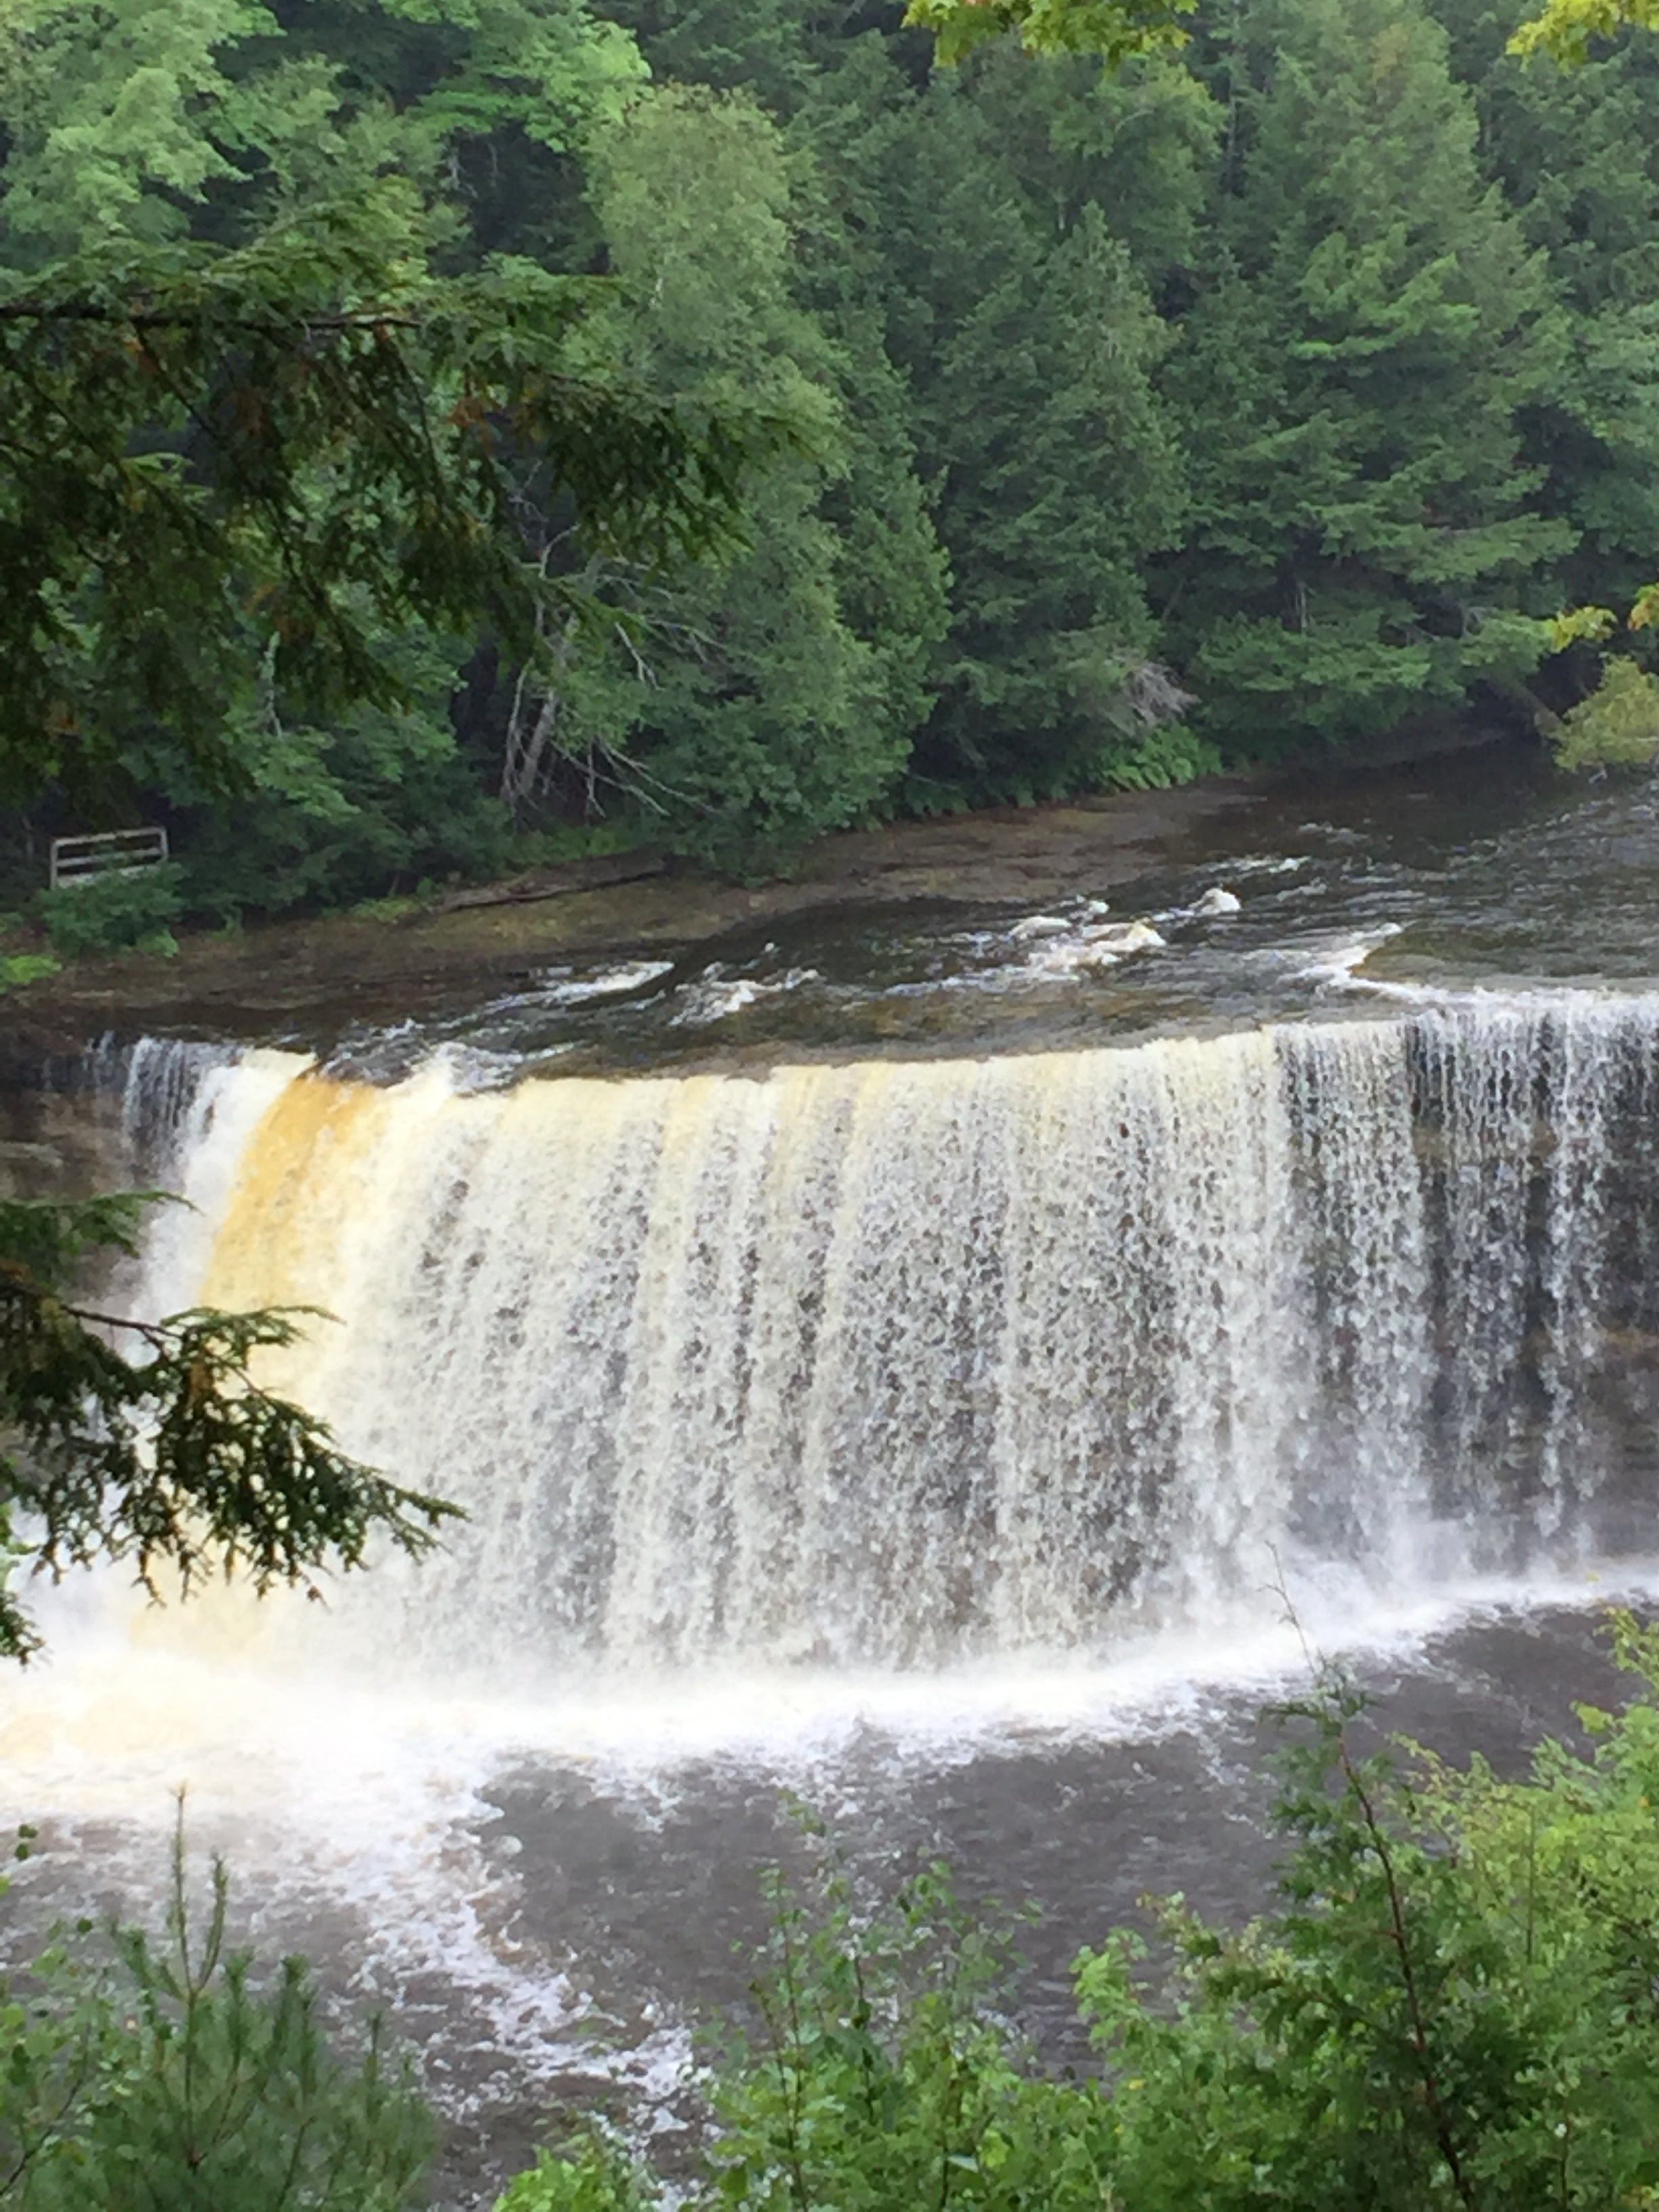 A short drive to the Falls